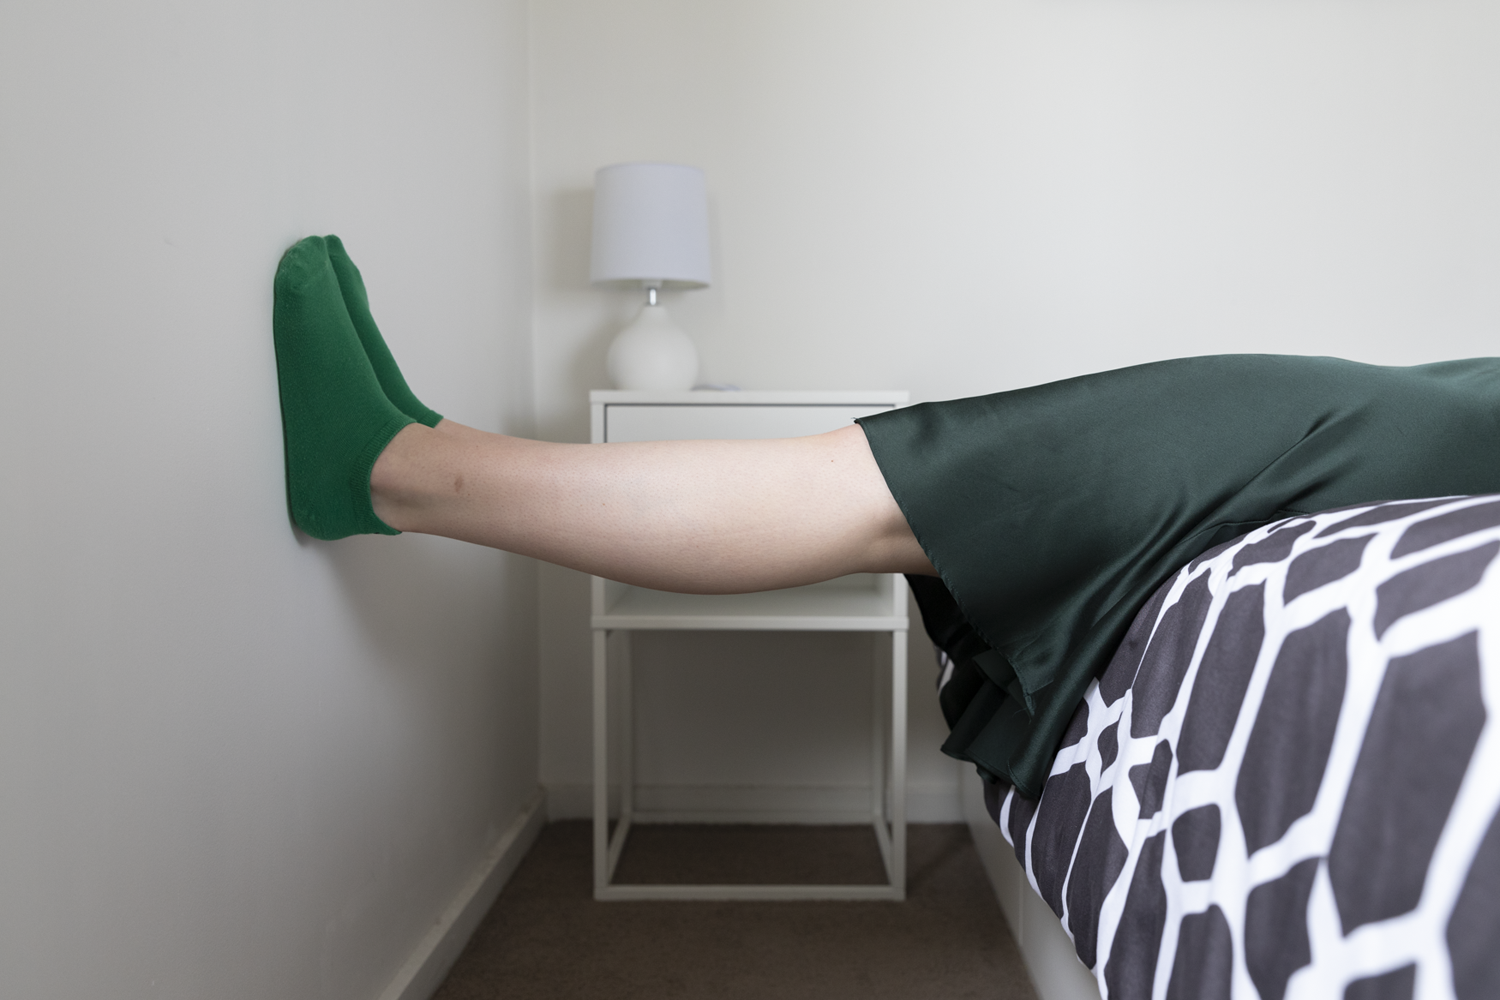 Colour photograph of legs in green skirt and green socks horizontally leaning on wall.